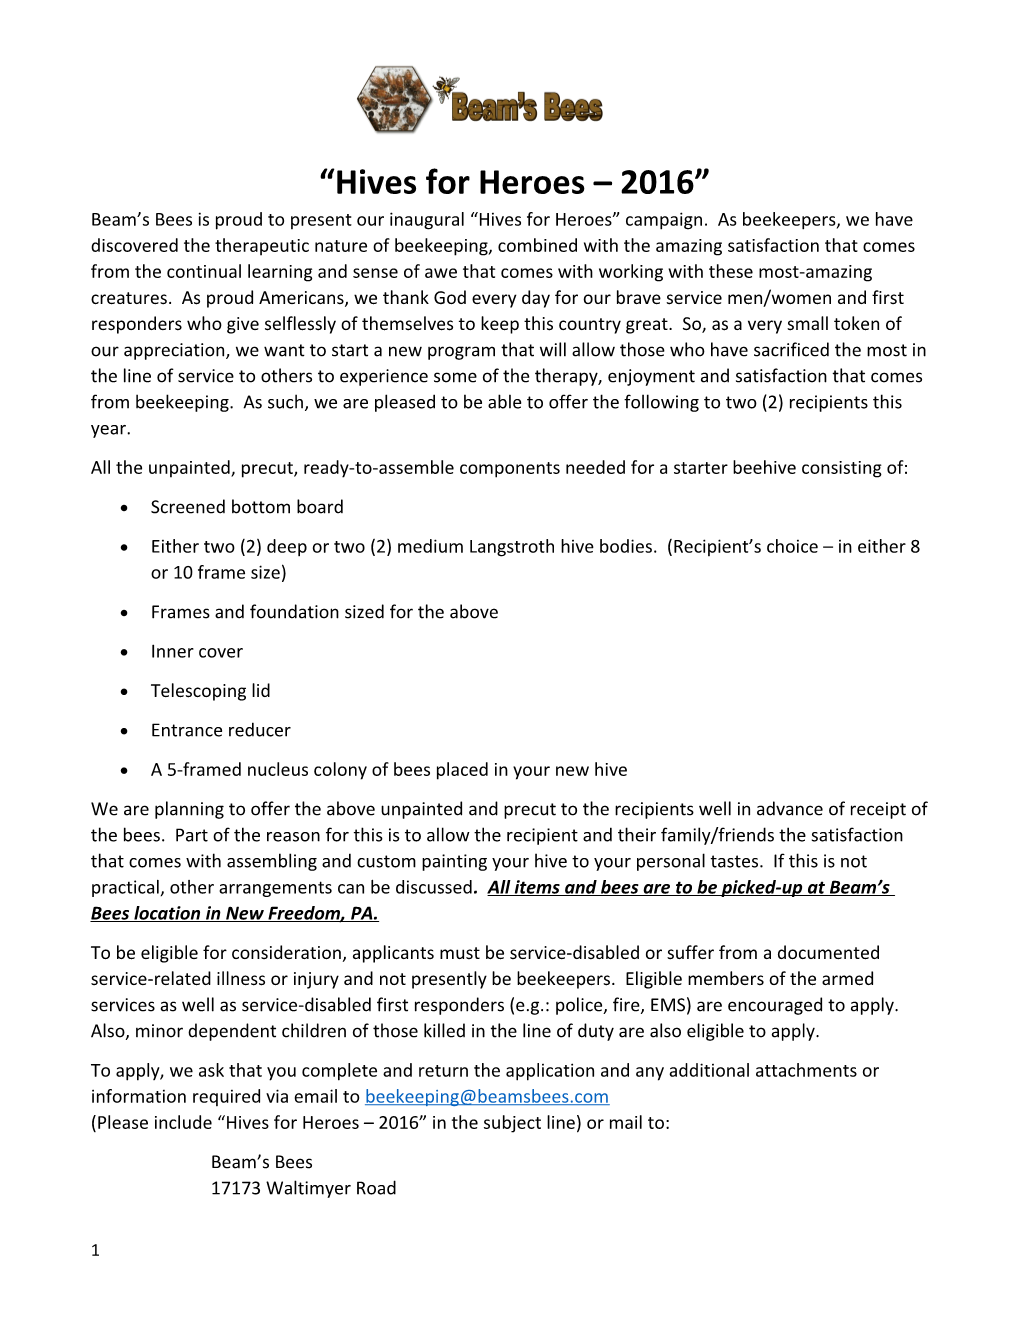 Hives for Heroes 2016